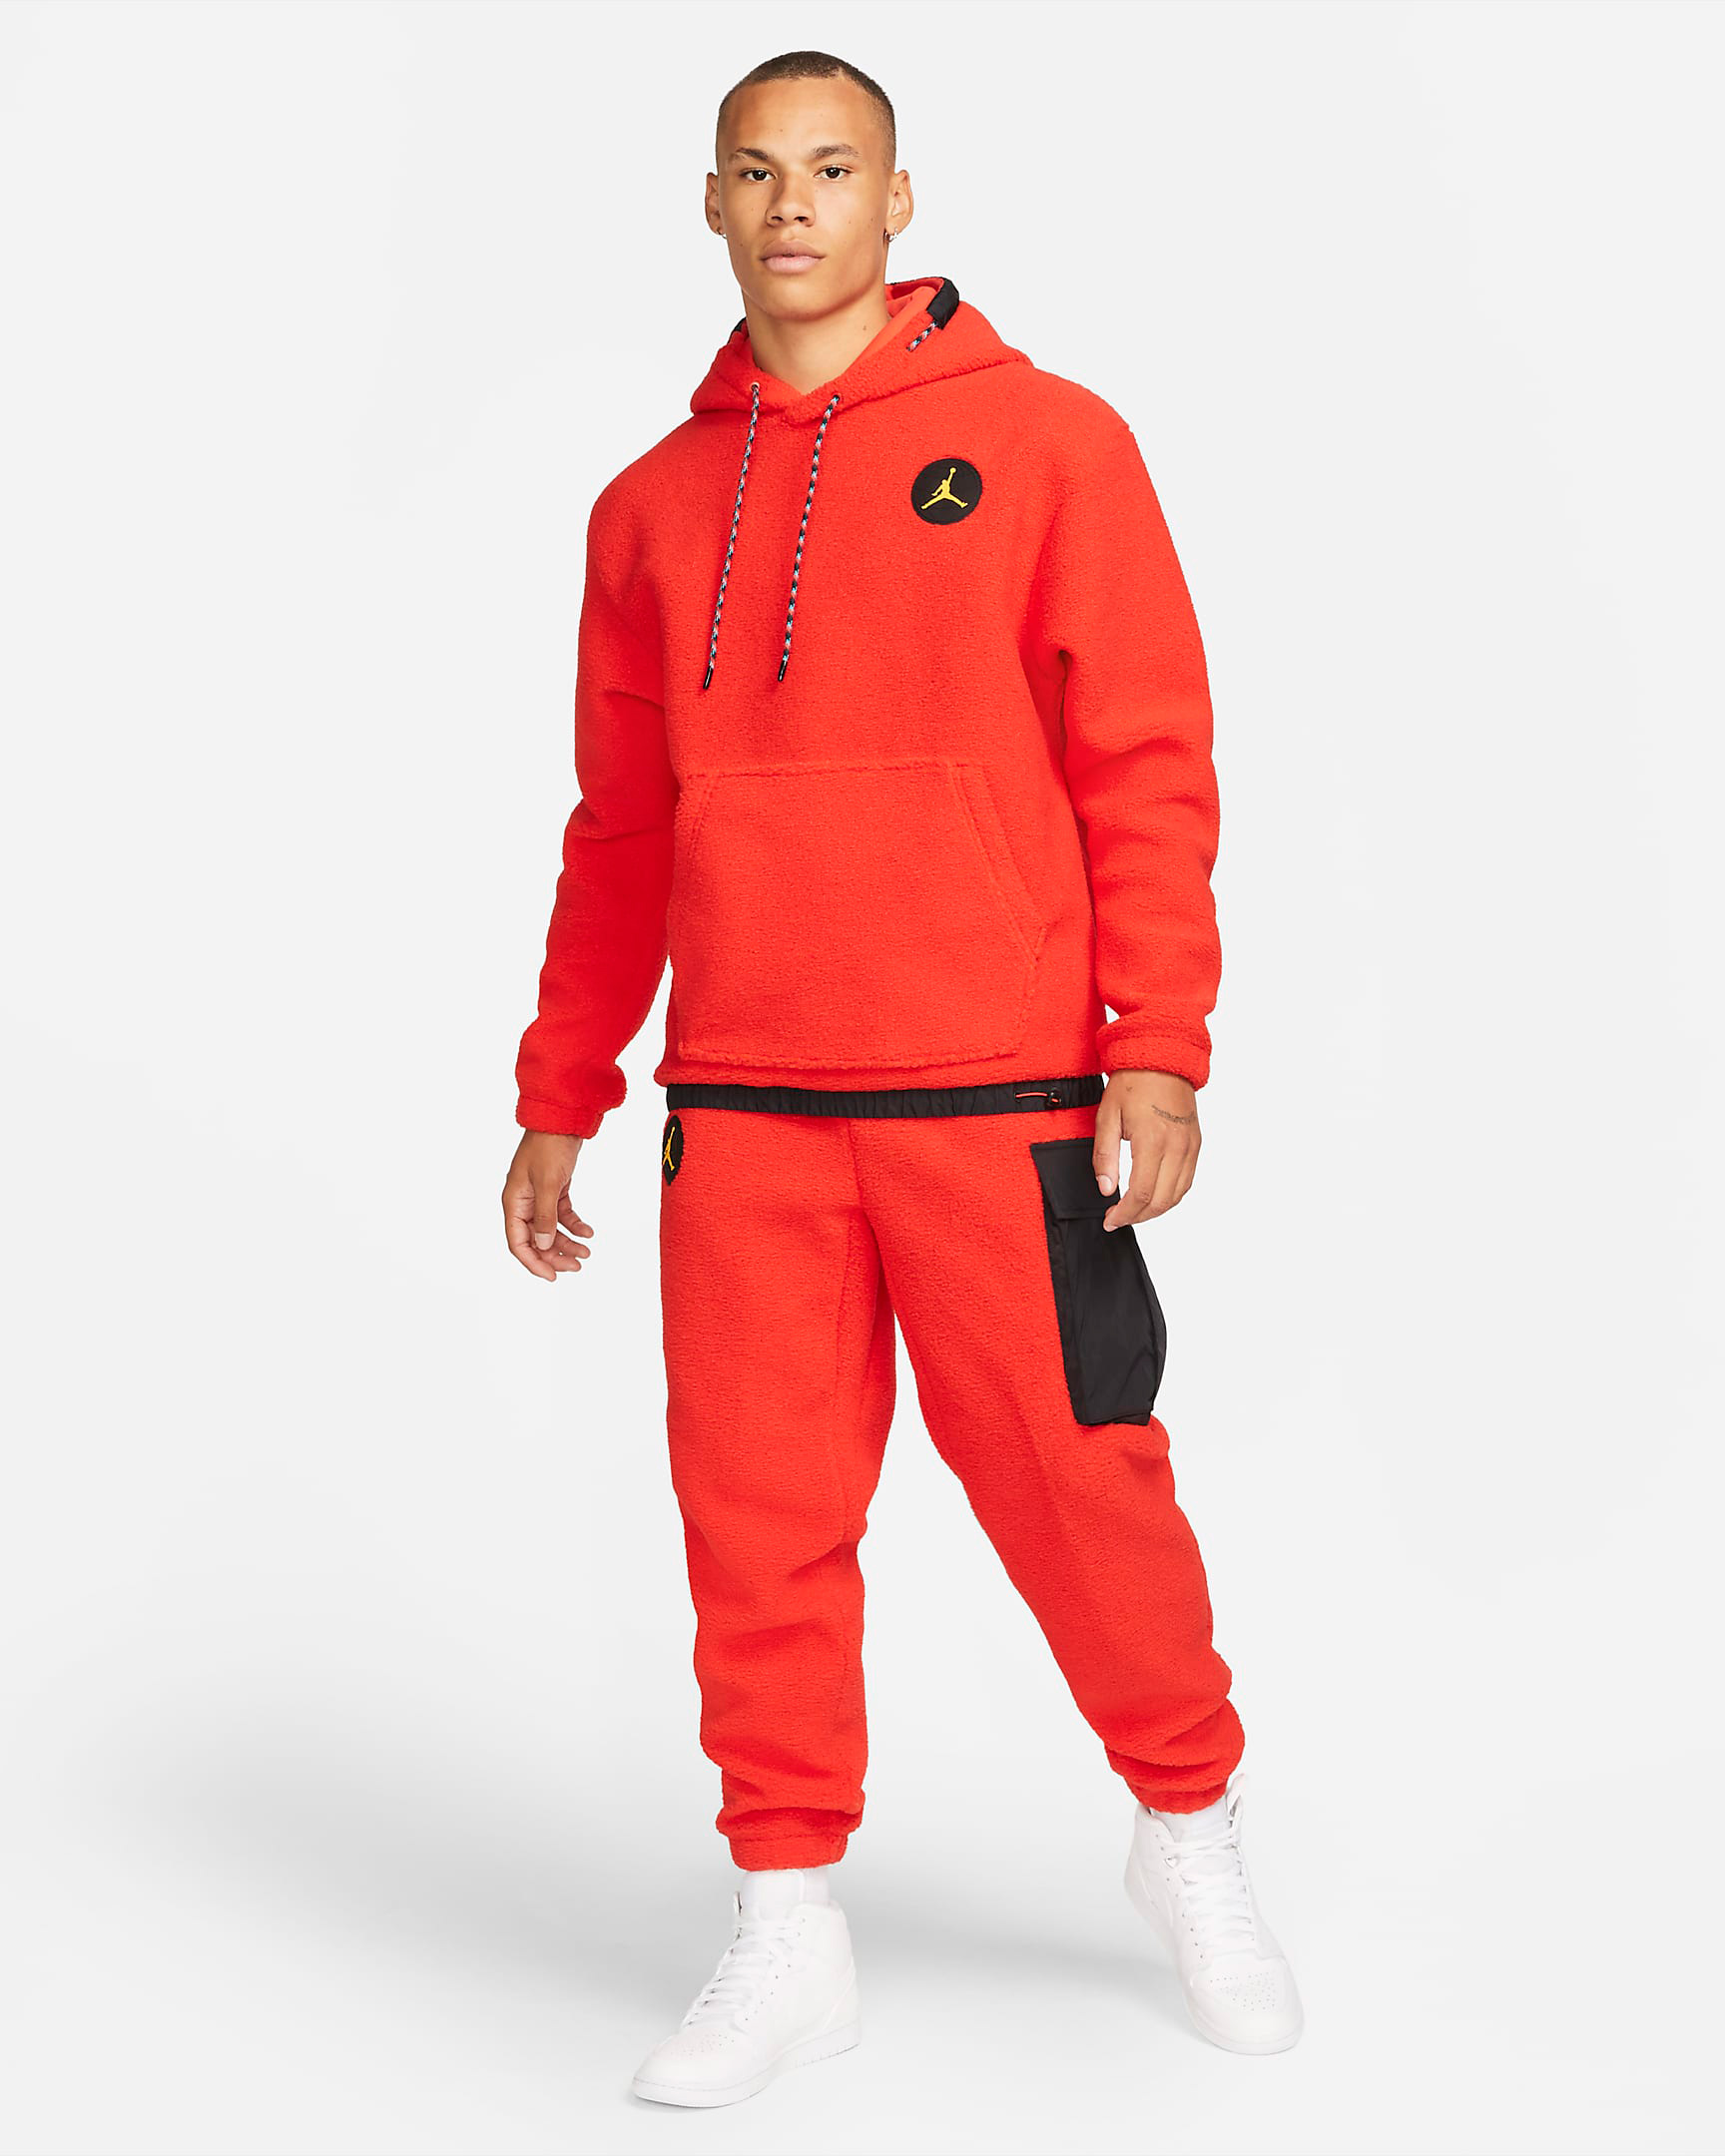 jordan-chile-red-mountainside-hoodie-pants-outfit